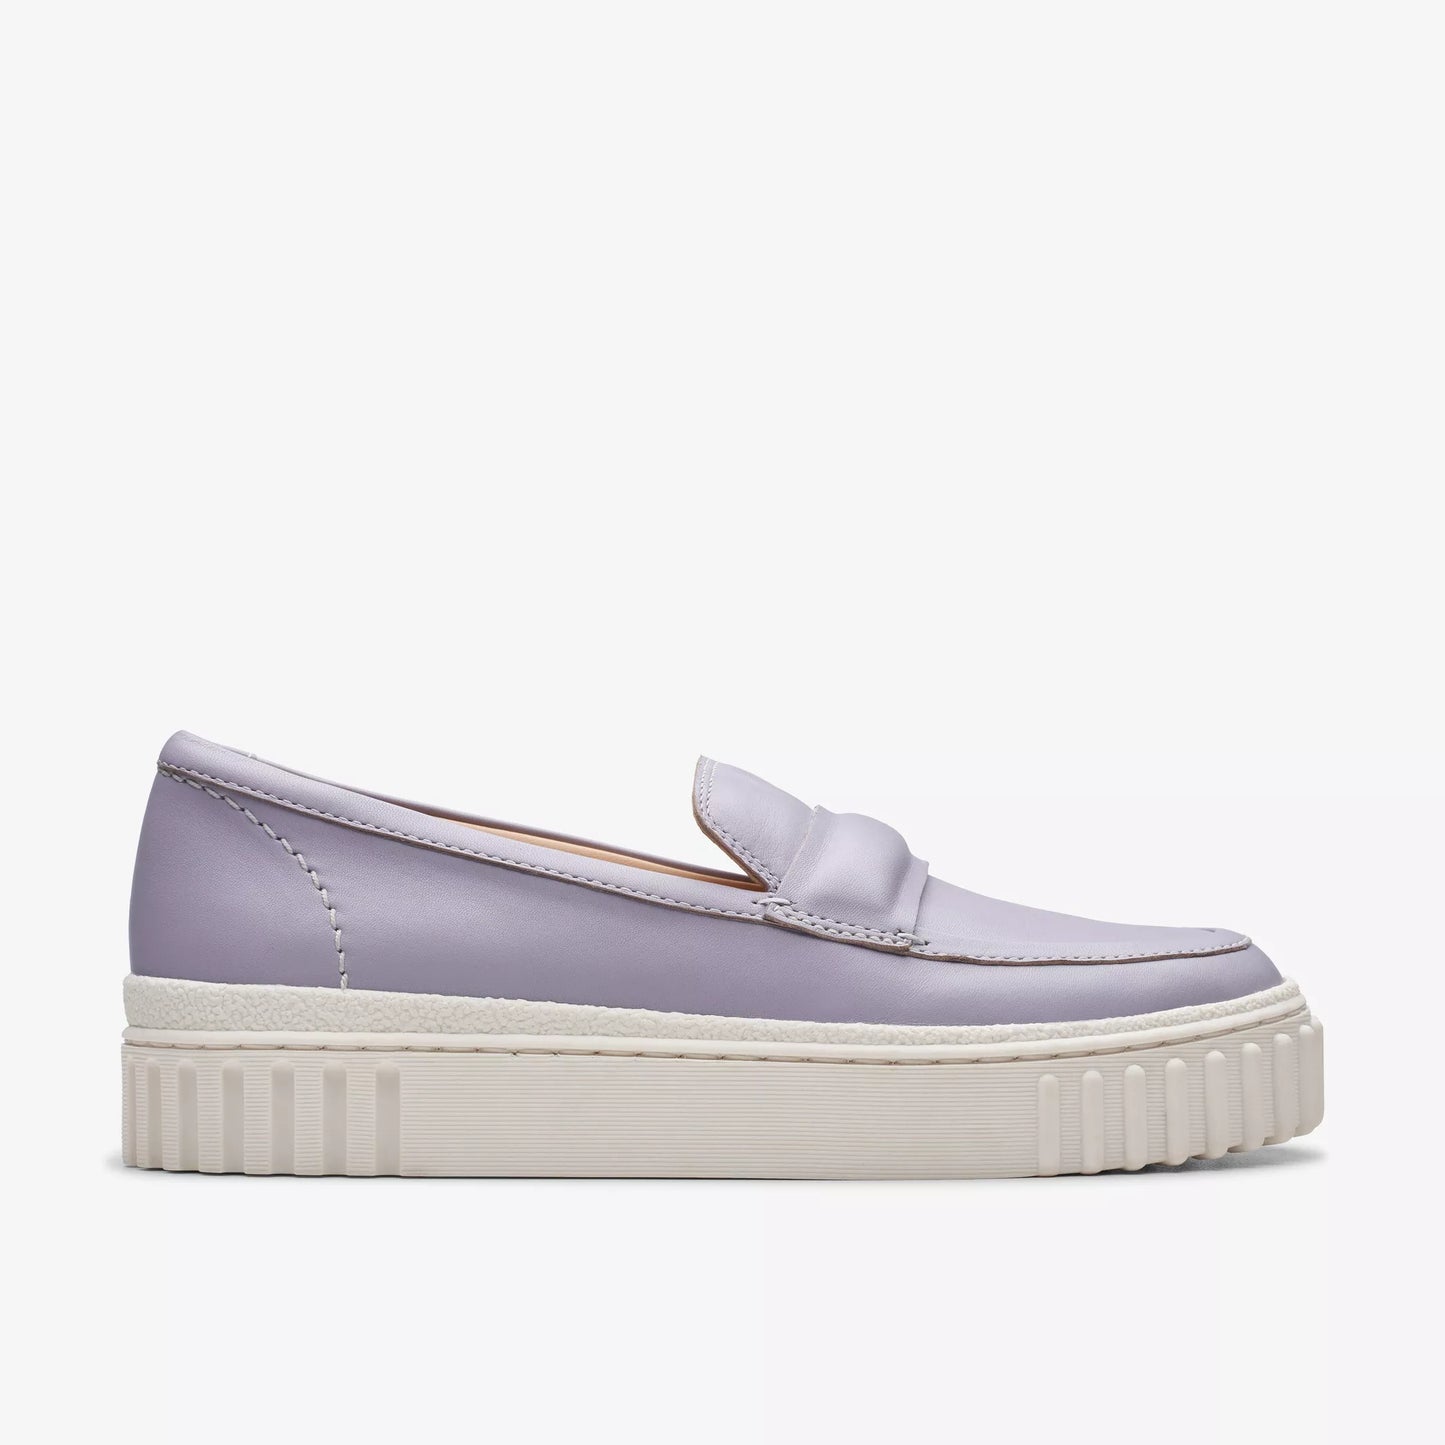 Side view of the Clarks Lilac Leather Mayhill Cove Loafer